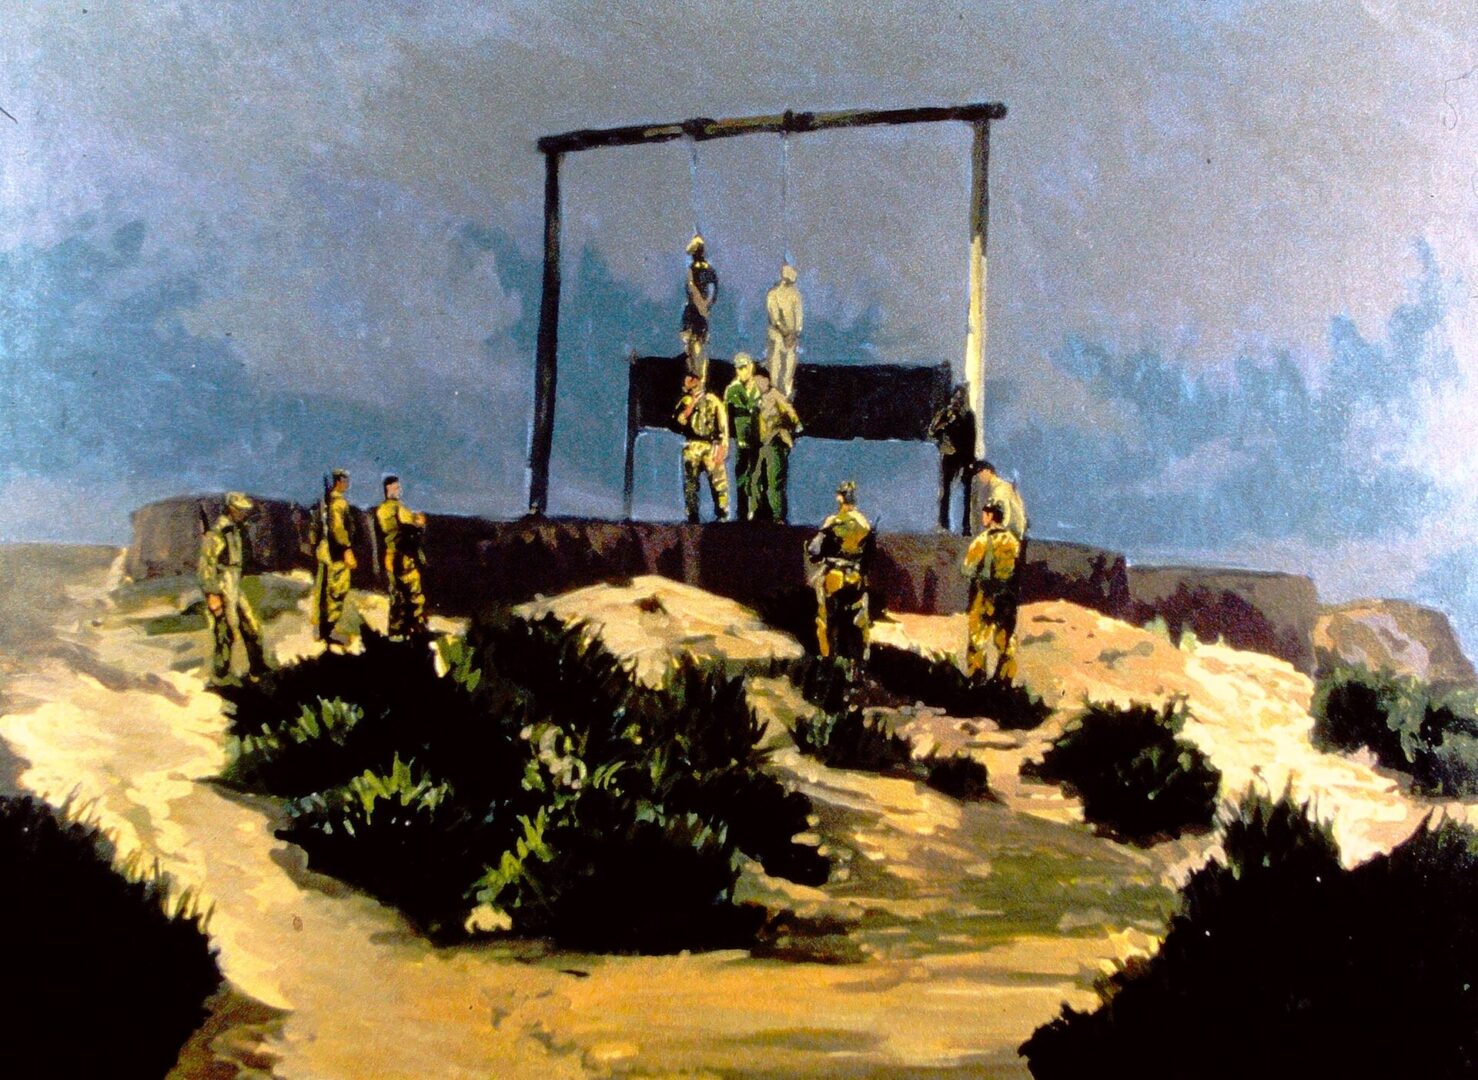 THE EXECUTION<br>
1984<br>
36" x 48"
